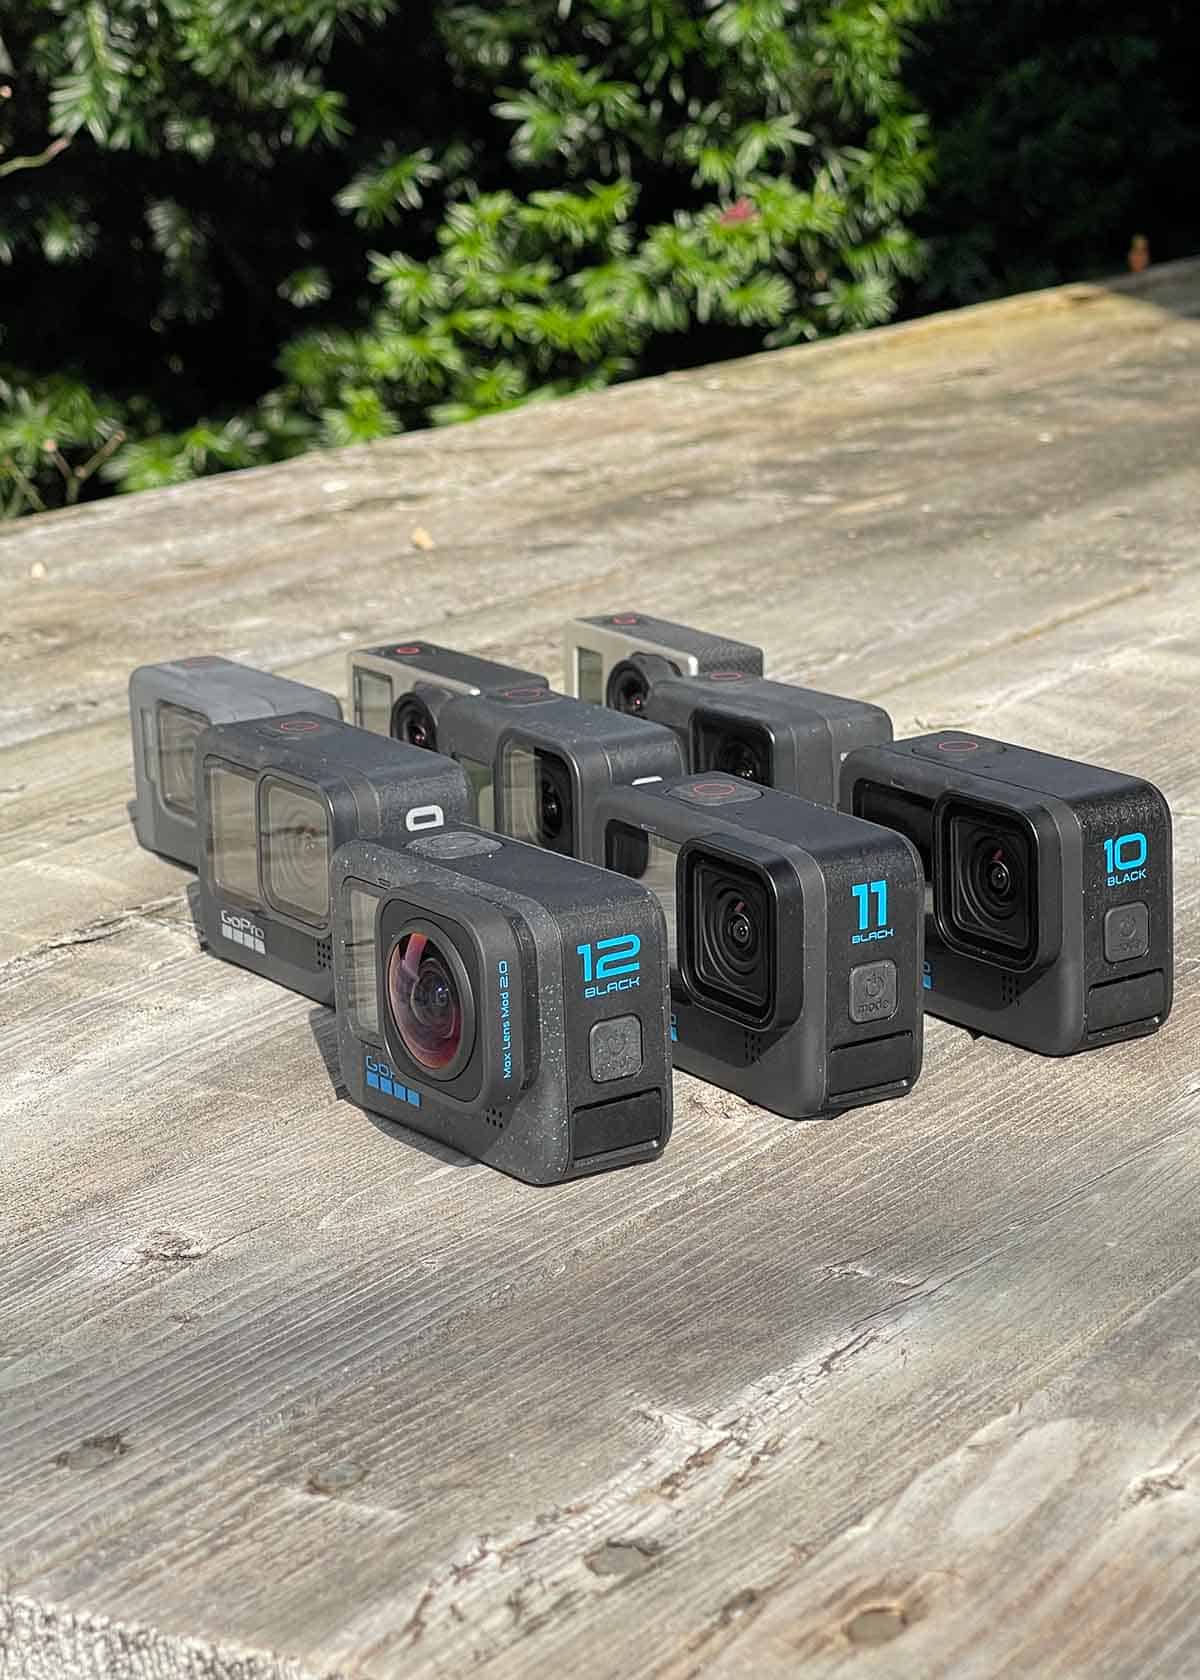 gopro differences compared